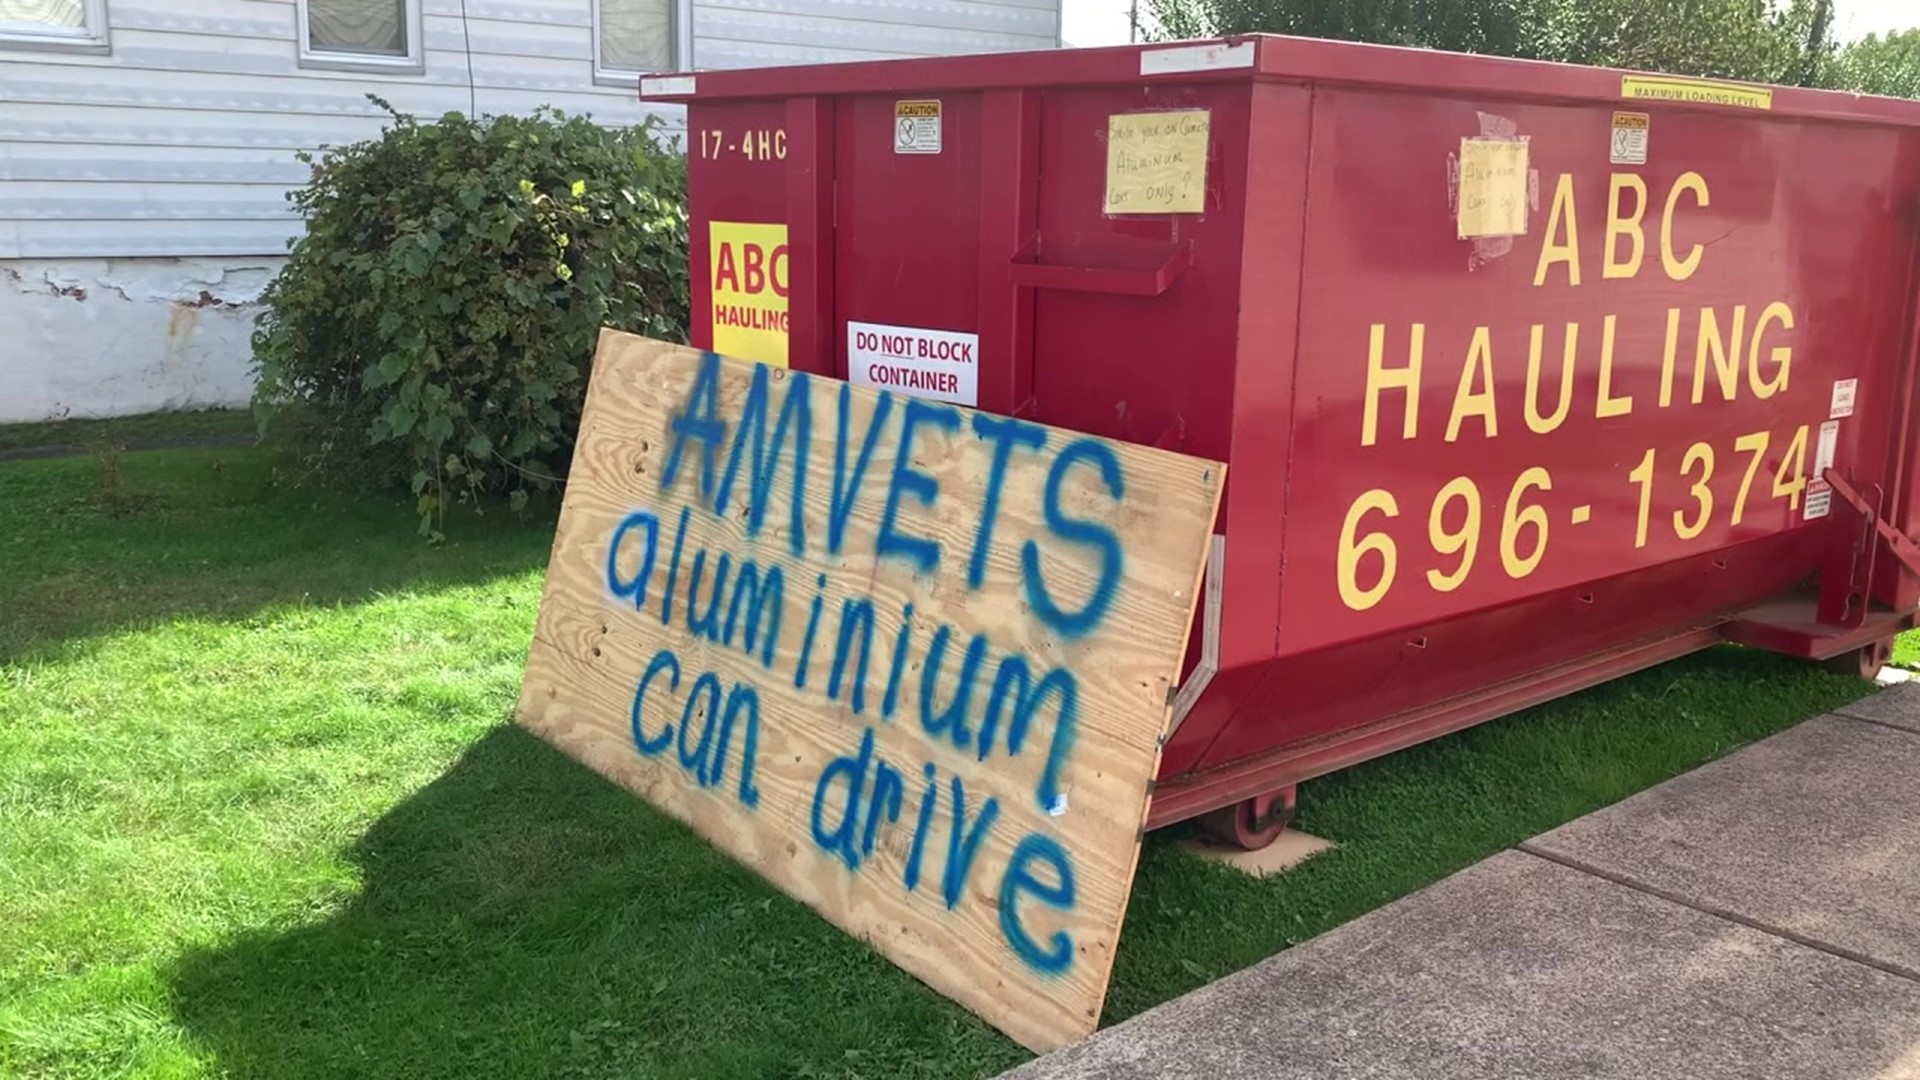 If you have aluminum cans sitting in your recycling bin, one group in Luzerne County is asking that you send the cans their way to help raise money for veterans.